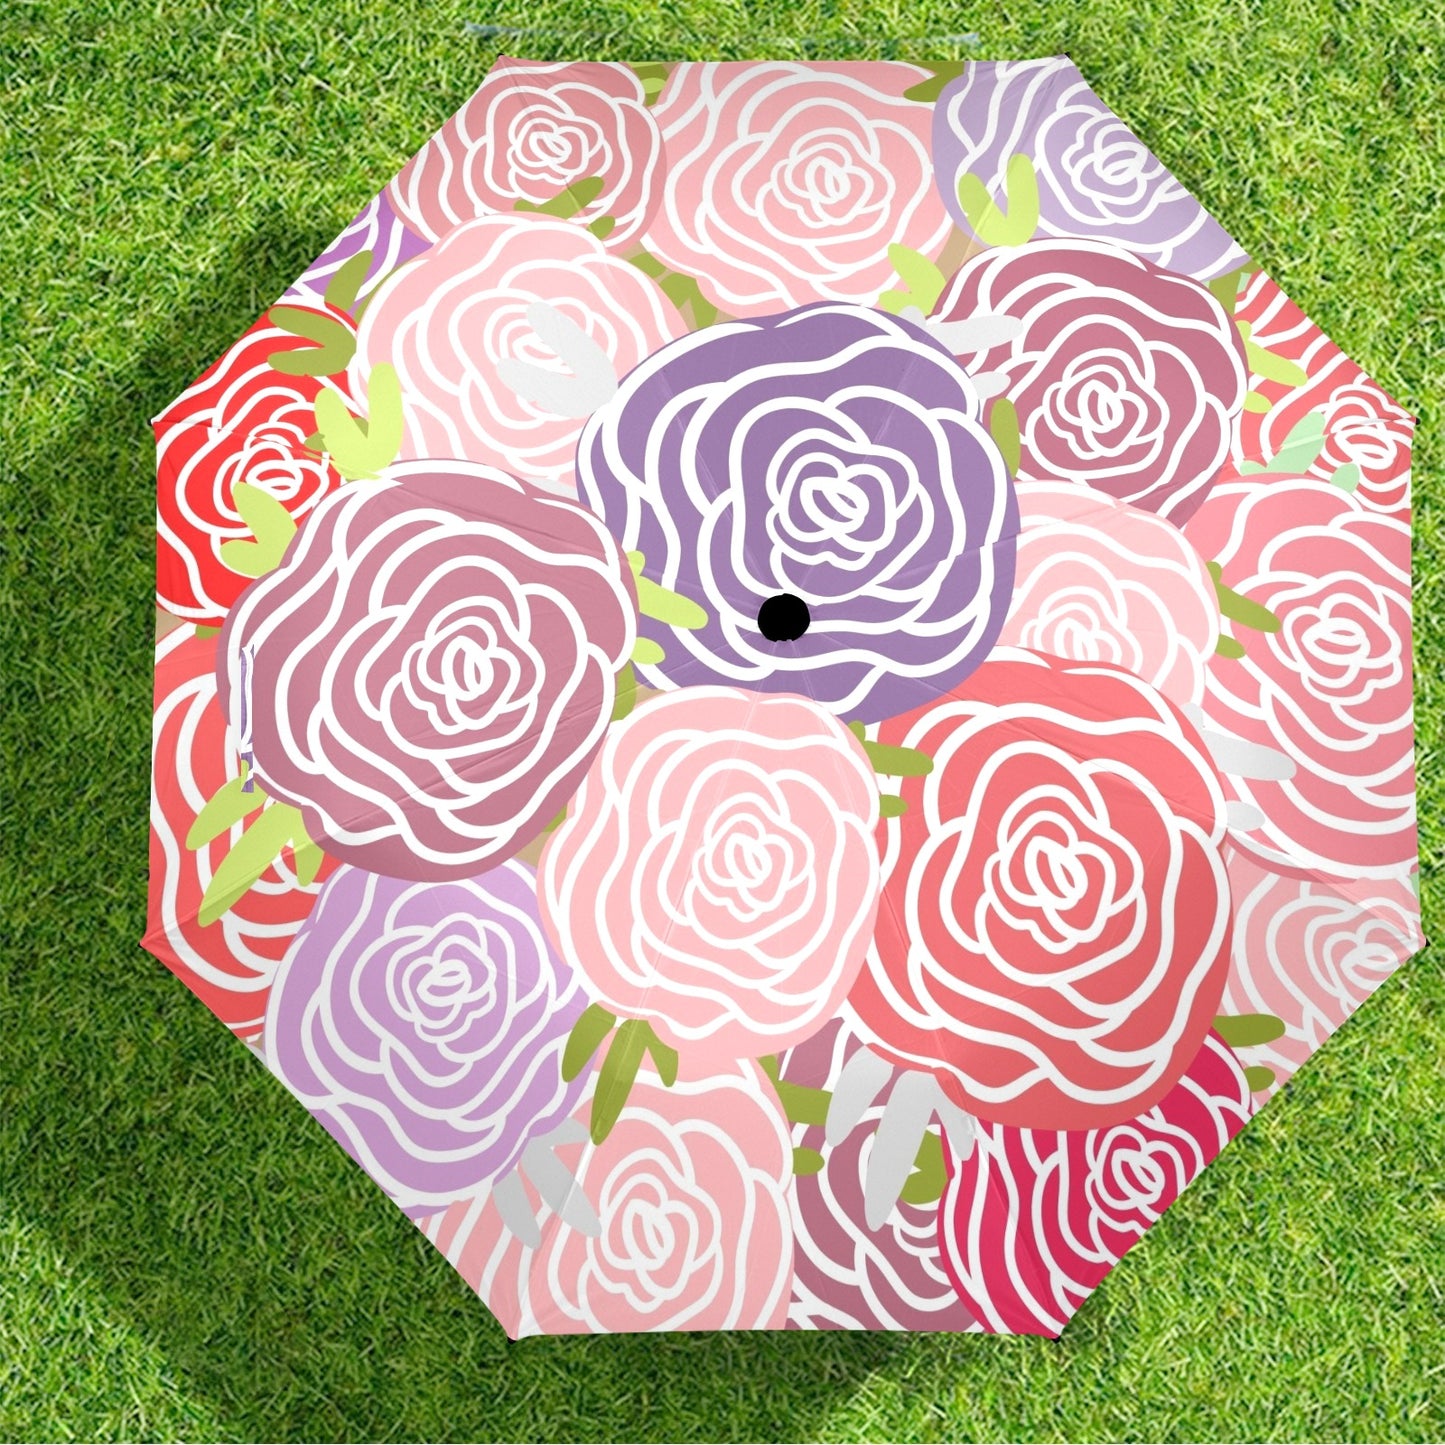 Abstract Roses - Semi-Automatic Foldable Umbrella Semi-Automatic Foldable Umbrella